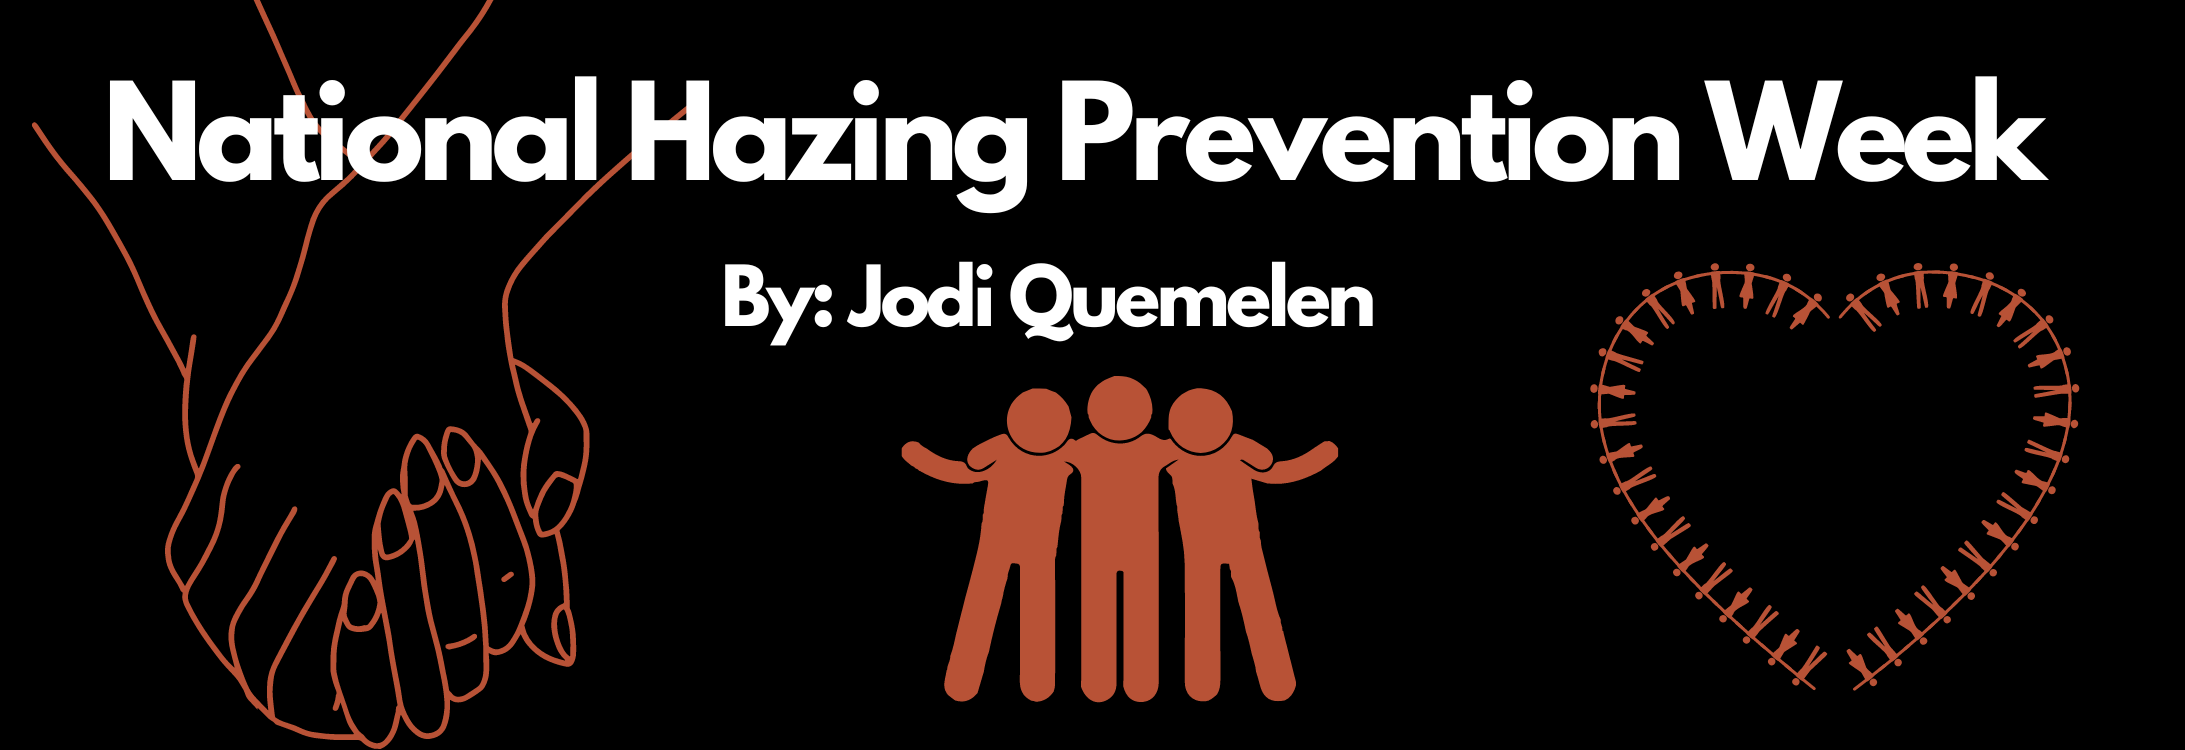 Hazing Prevention blog cover